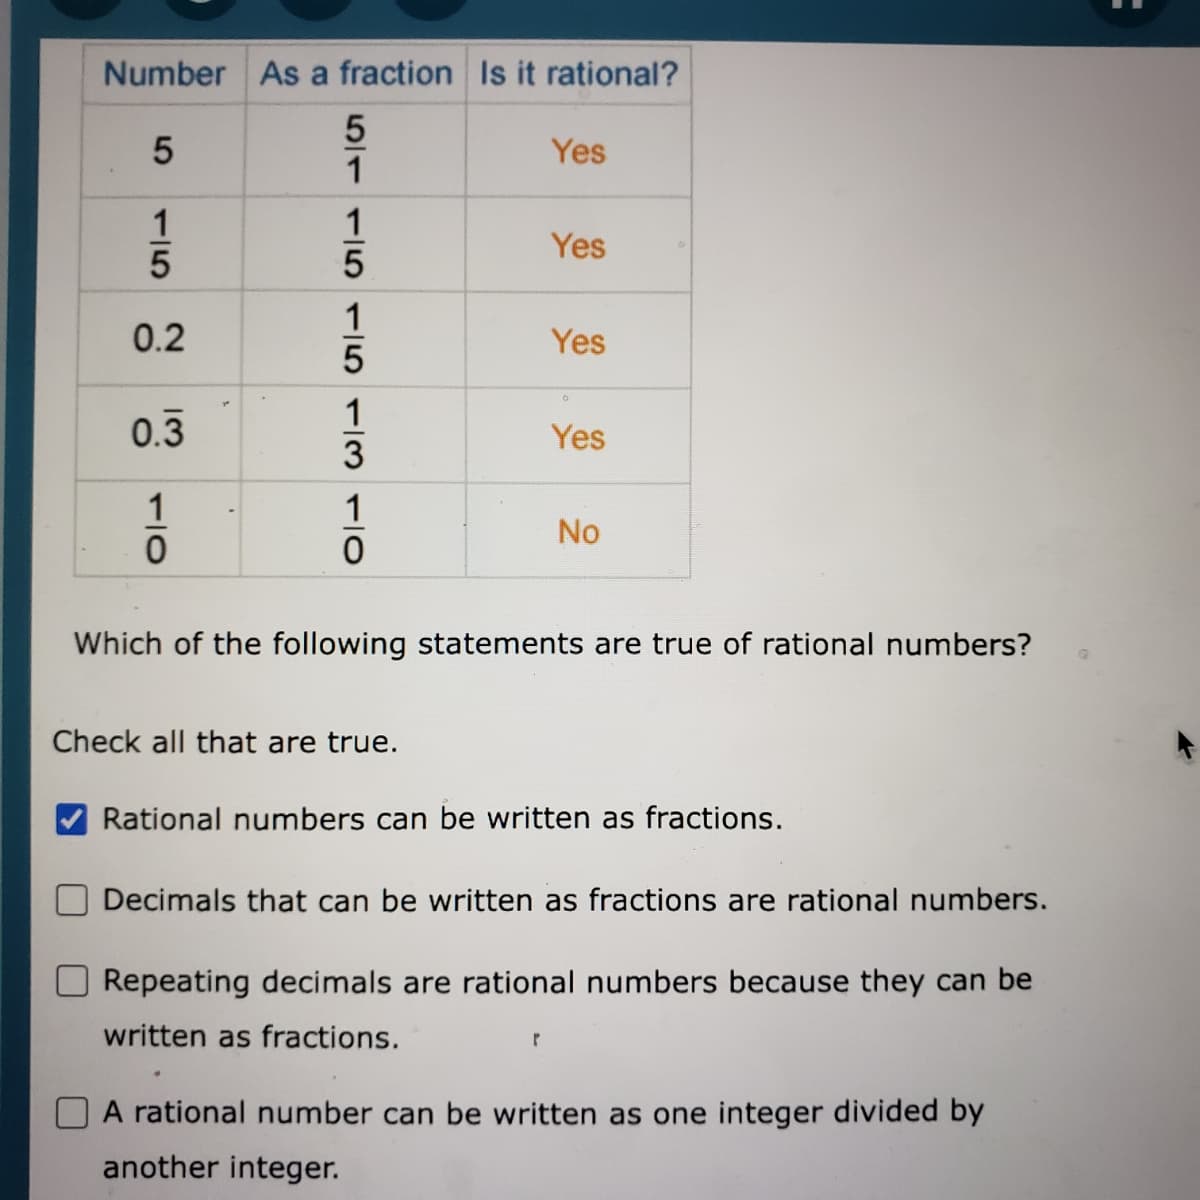 Number As a fraction Is it rational?
Yes
Yes
0.2
Yes
0.3
Yes
No
Which of the following statements are true of rational numbers?
Check all that are true.
Rational numbers can be written as fractions.
Decimals that can be written as fractions are rational numbers.
Repeating decimals are rational numbers because they can be
written as fractions.
A rational number can be written as one integer divided by
another integer.
51116n15131
5
115
110
